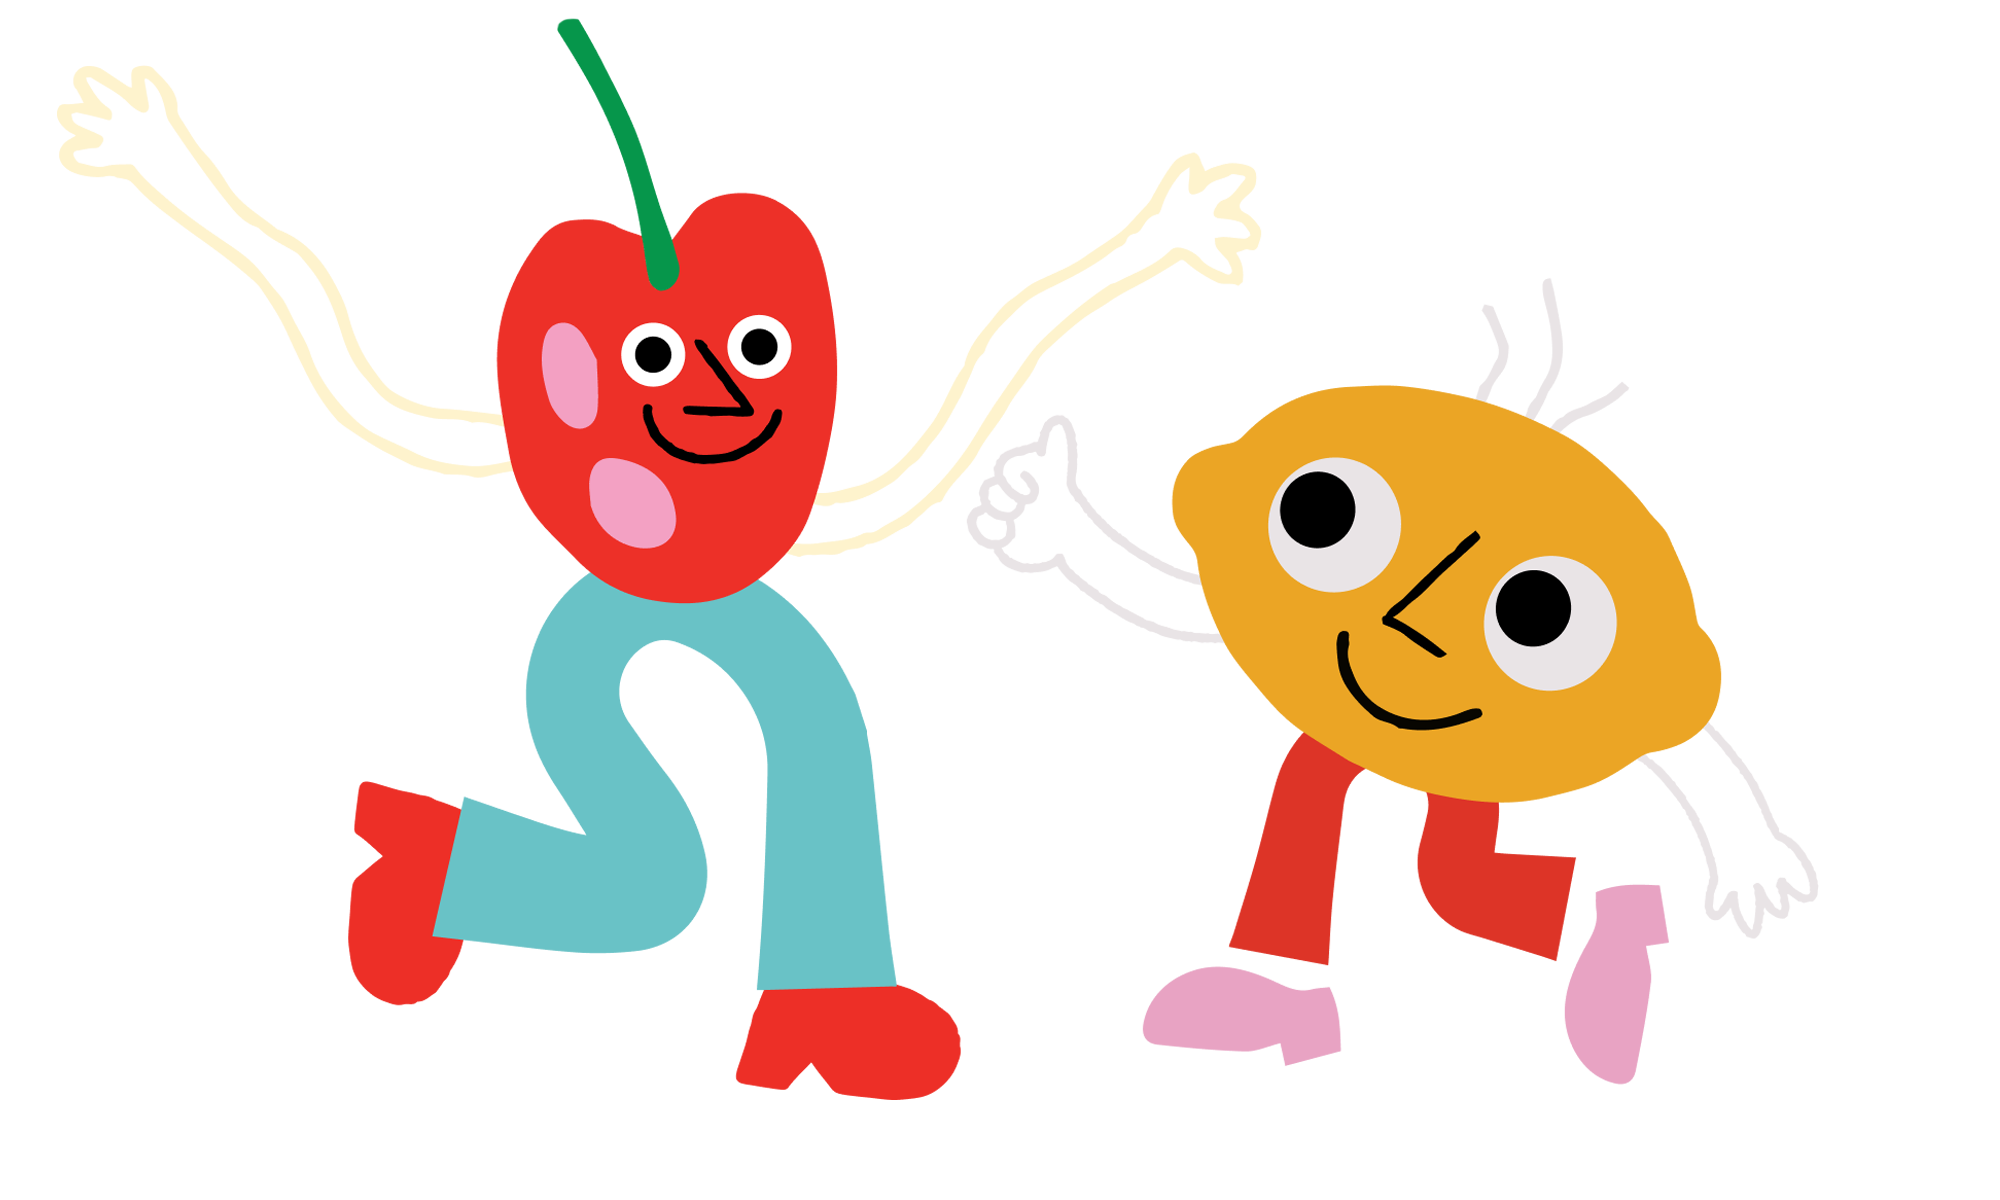 Cute cherry and lemon sticker. The lemon is giving a thumbs up and smiling at the cherry. The cherry is smiling at the camera. Both fruit characters are wearing pants and shoes.